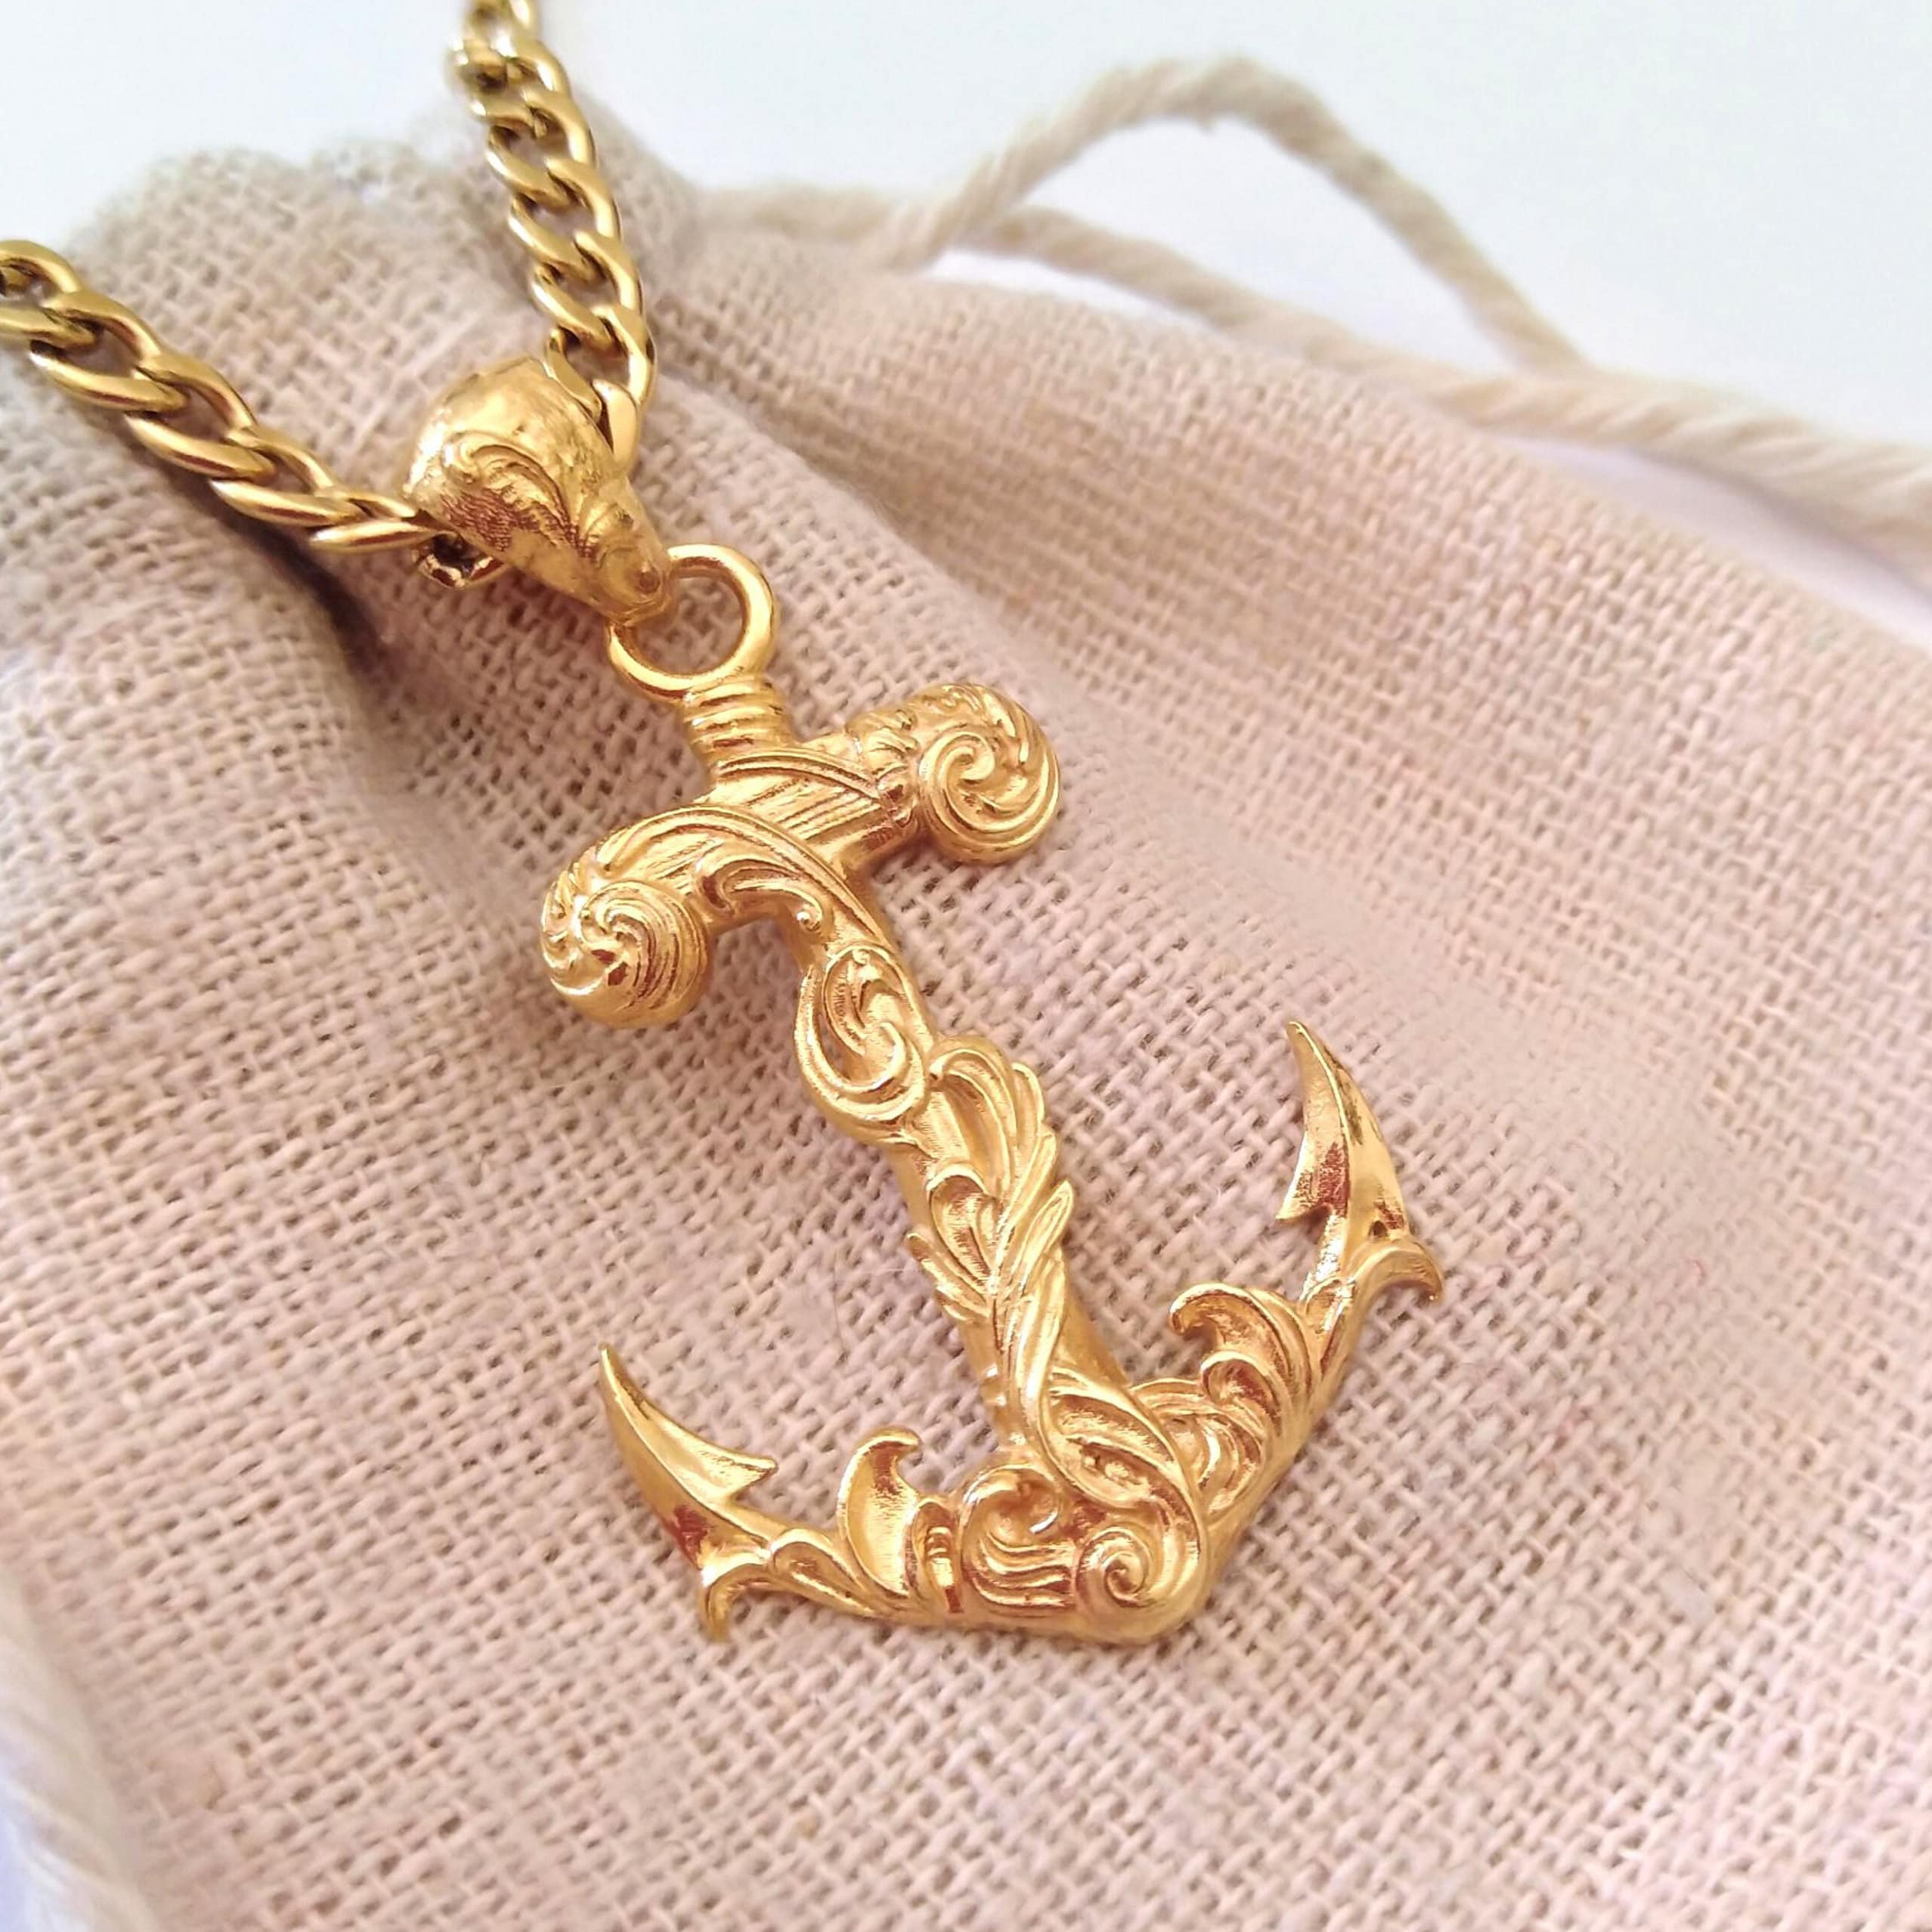 Men's Stainless Steel Anchor Pendant with Leather Necklace Gold Plated